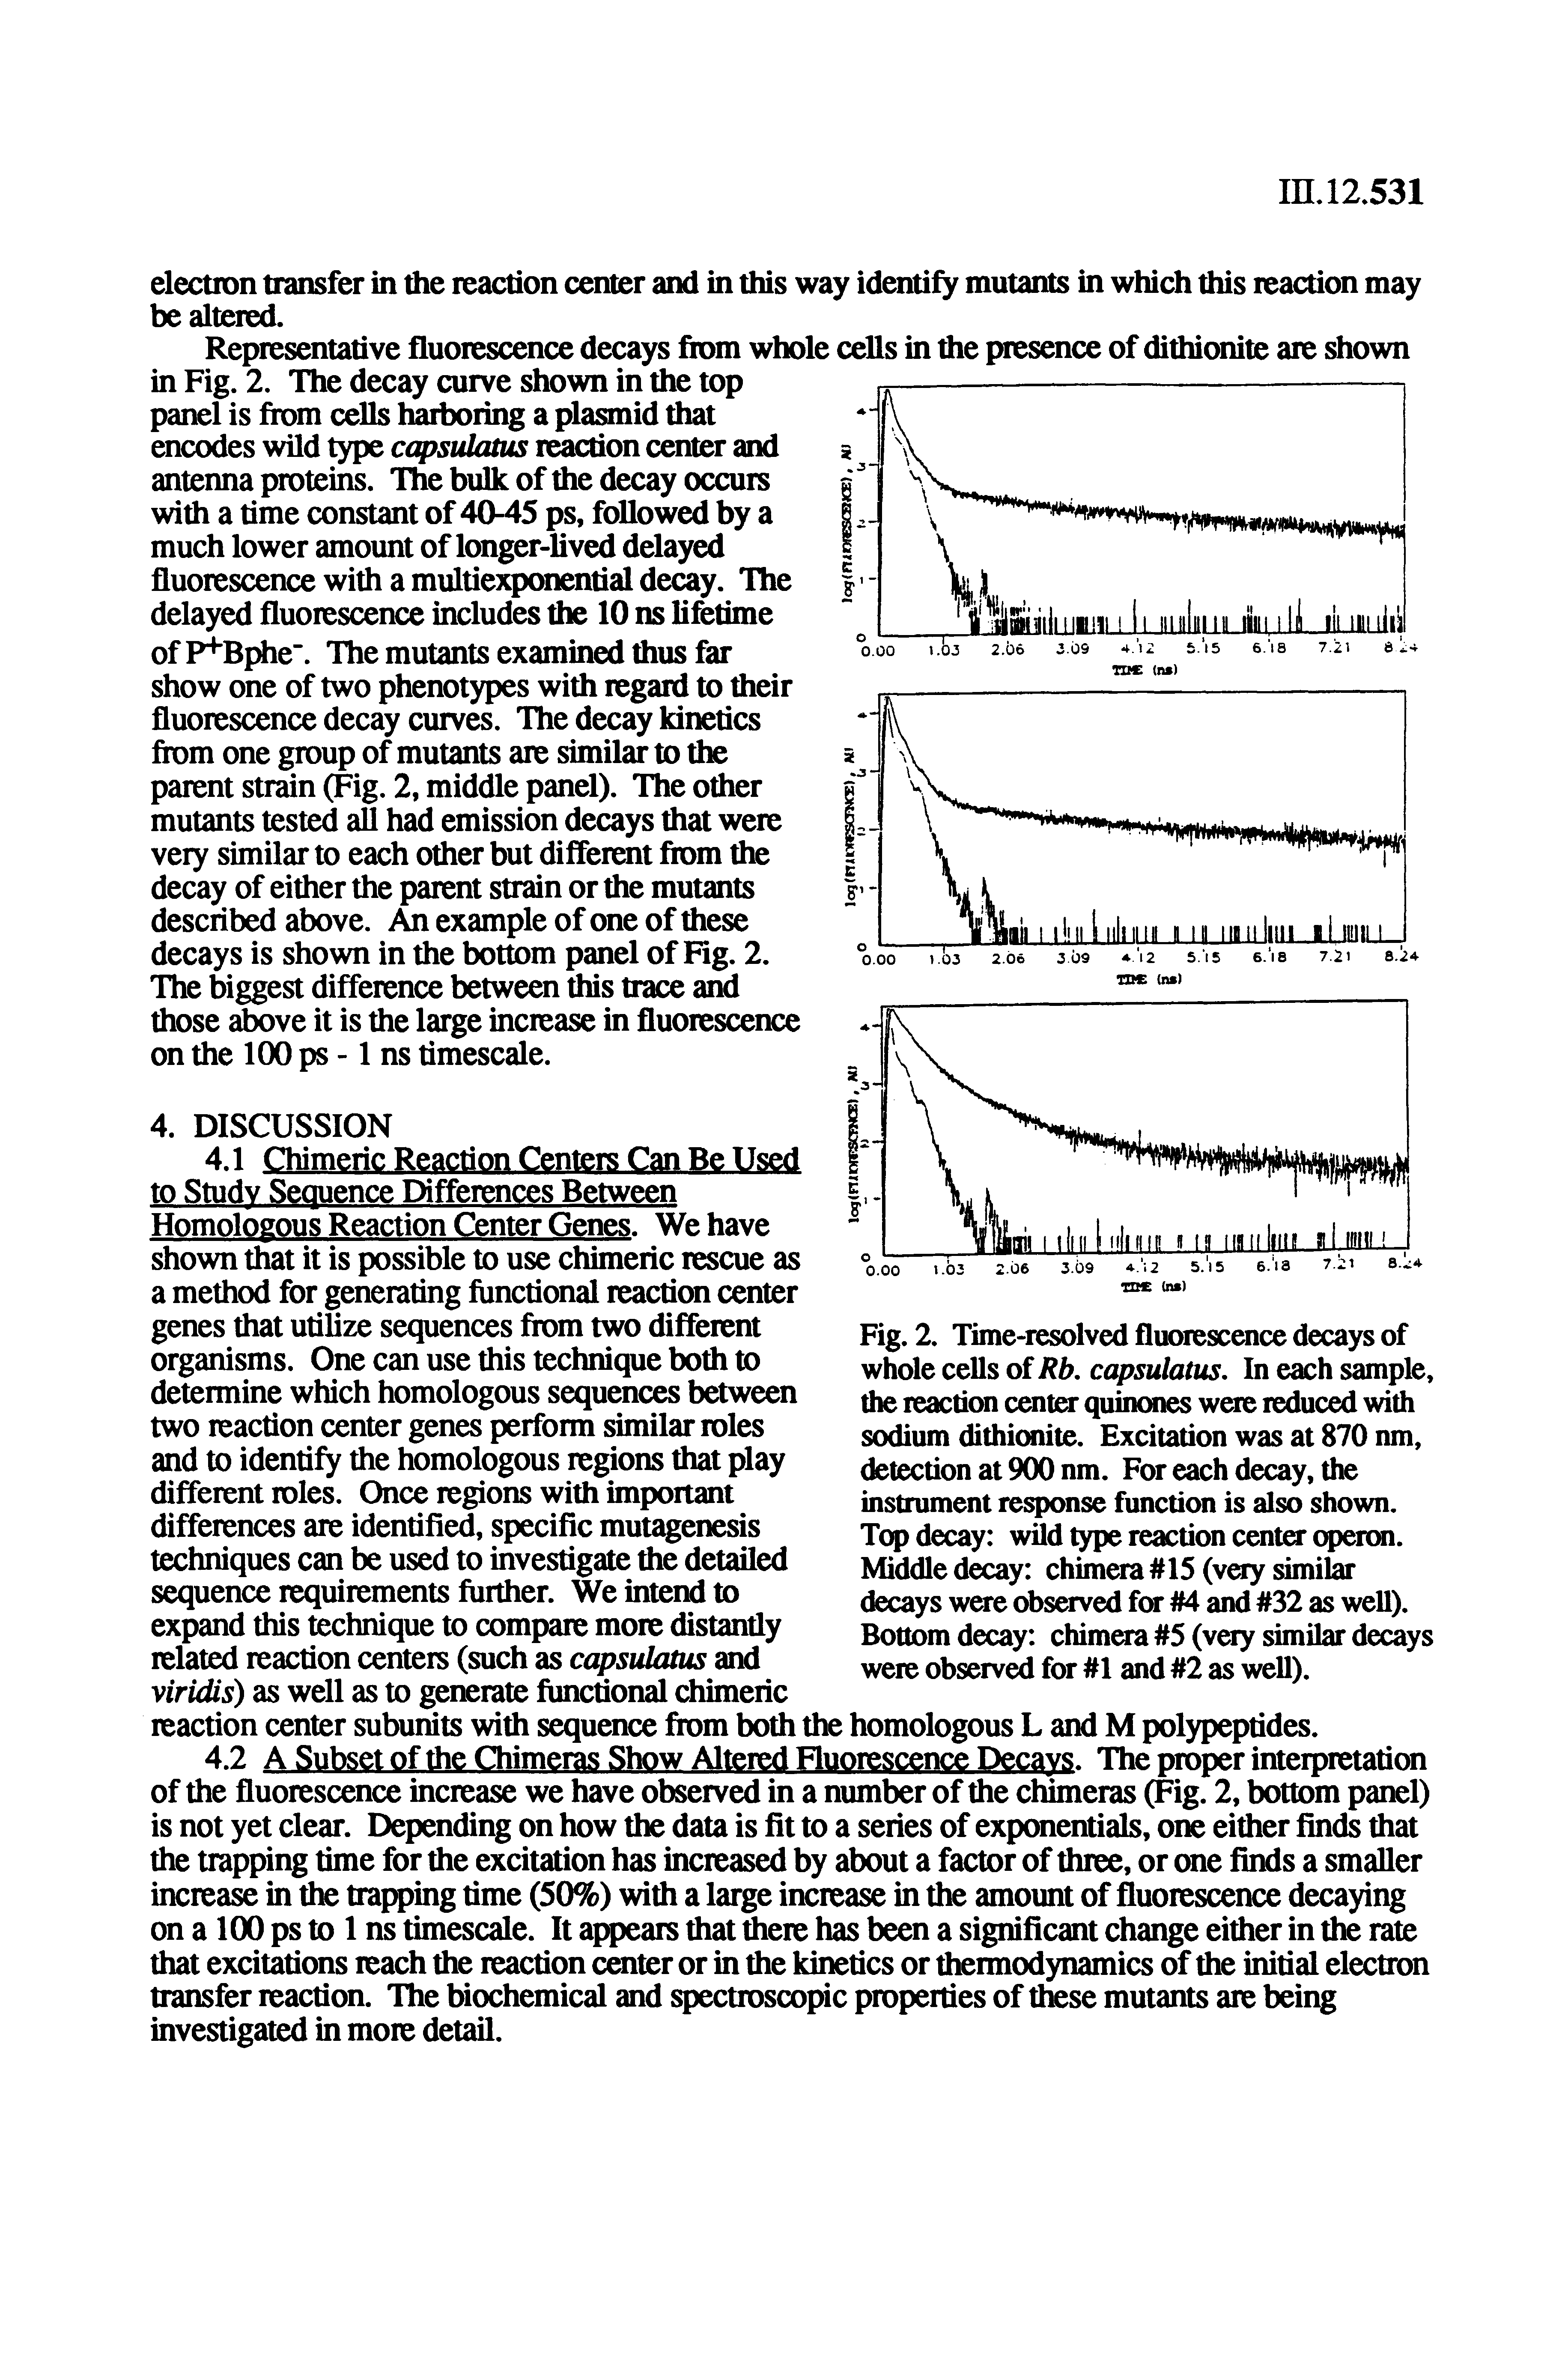 Fig. 2. Time-resolved fluorescence decays of whole cells of Rb. capsulatus. In each sample, the reaction center quinones west reduced with sodium dithionite. Excitation was at 870 nm, detection at 900 nm. For each decay, the instrument response function is also shown. Top decay wild type reaction center operon. Middle decay chimera 15 (yery similar decays w e observed for 4 and 32 as well). Bottom decay chimera 5 (vay similar decays. , -. .. wereobserv for and 2aswell).